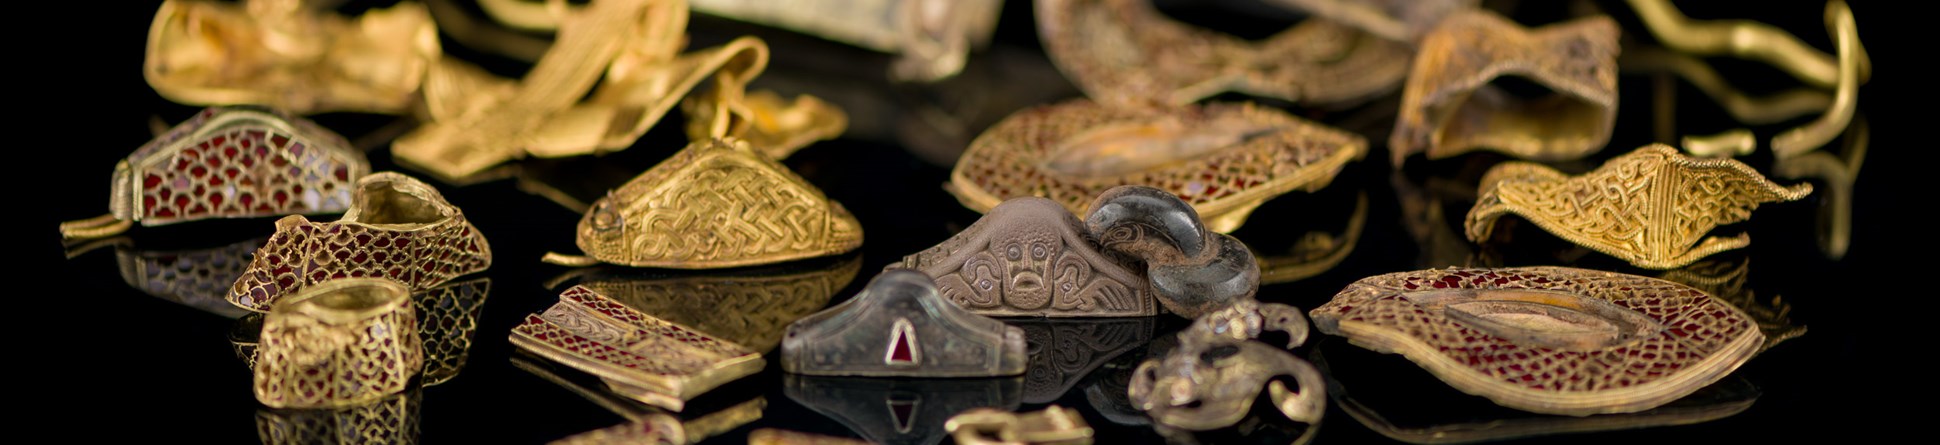 A hoard of decorated gold objects.